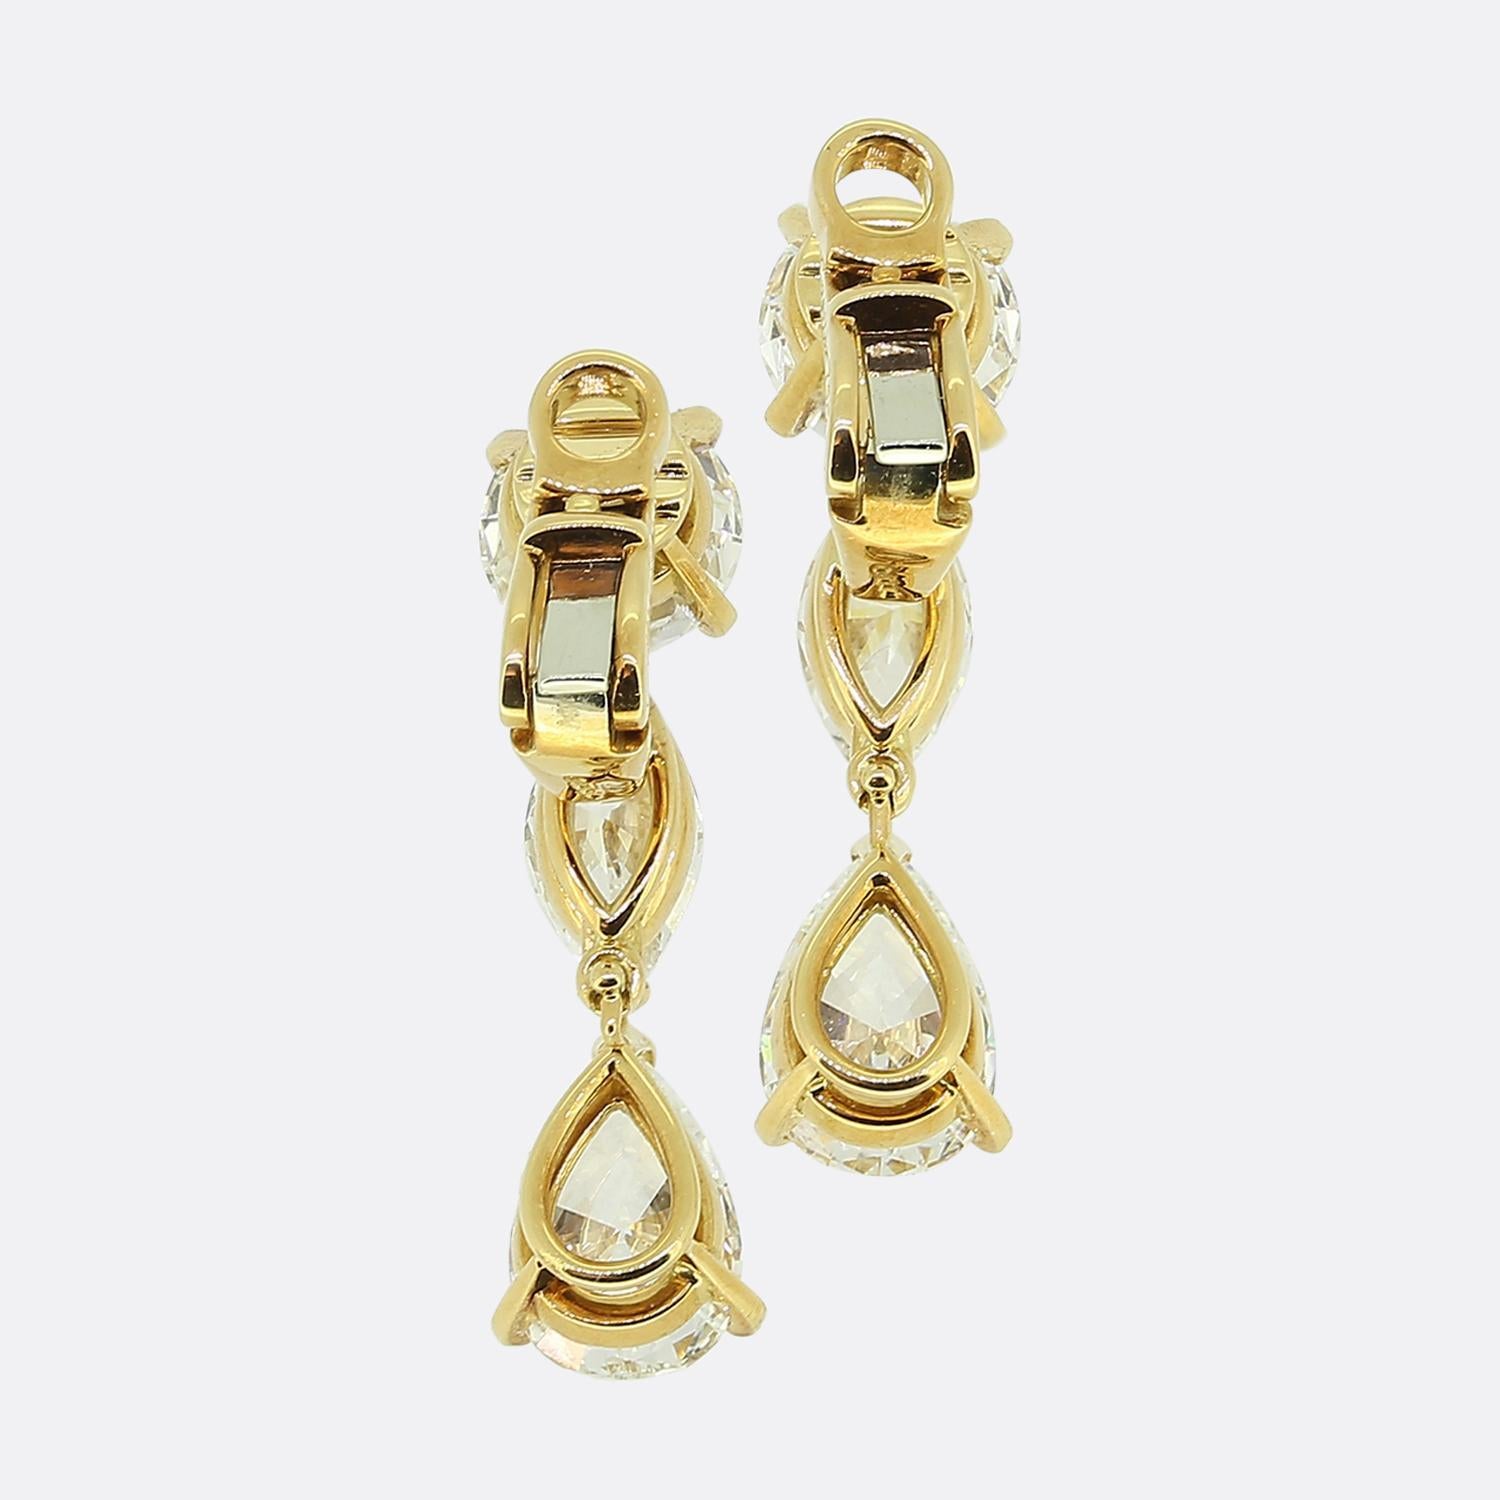 Here we have a truly exceptional pair of diamond drop earrings from the world renowned jewellery house of Cartier. Each piece has been crafted from 18ct yellow gold and showcases a trio of natural diamonds falling vertically in a single line